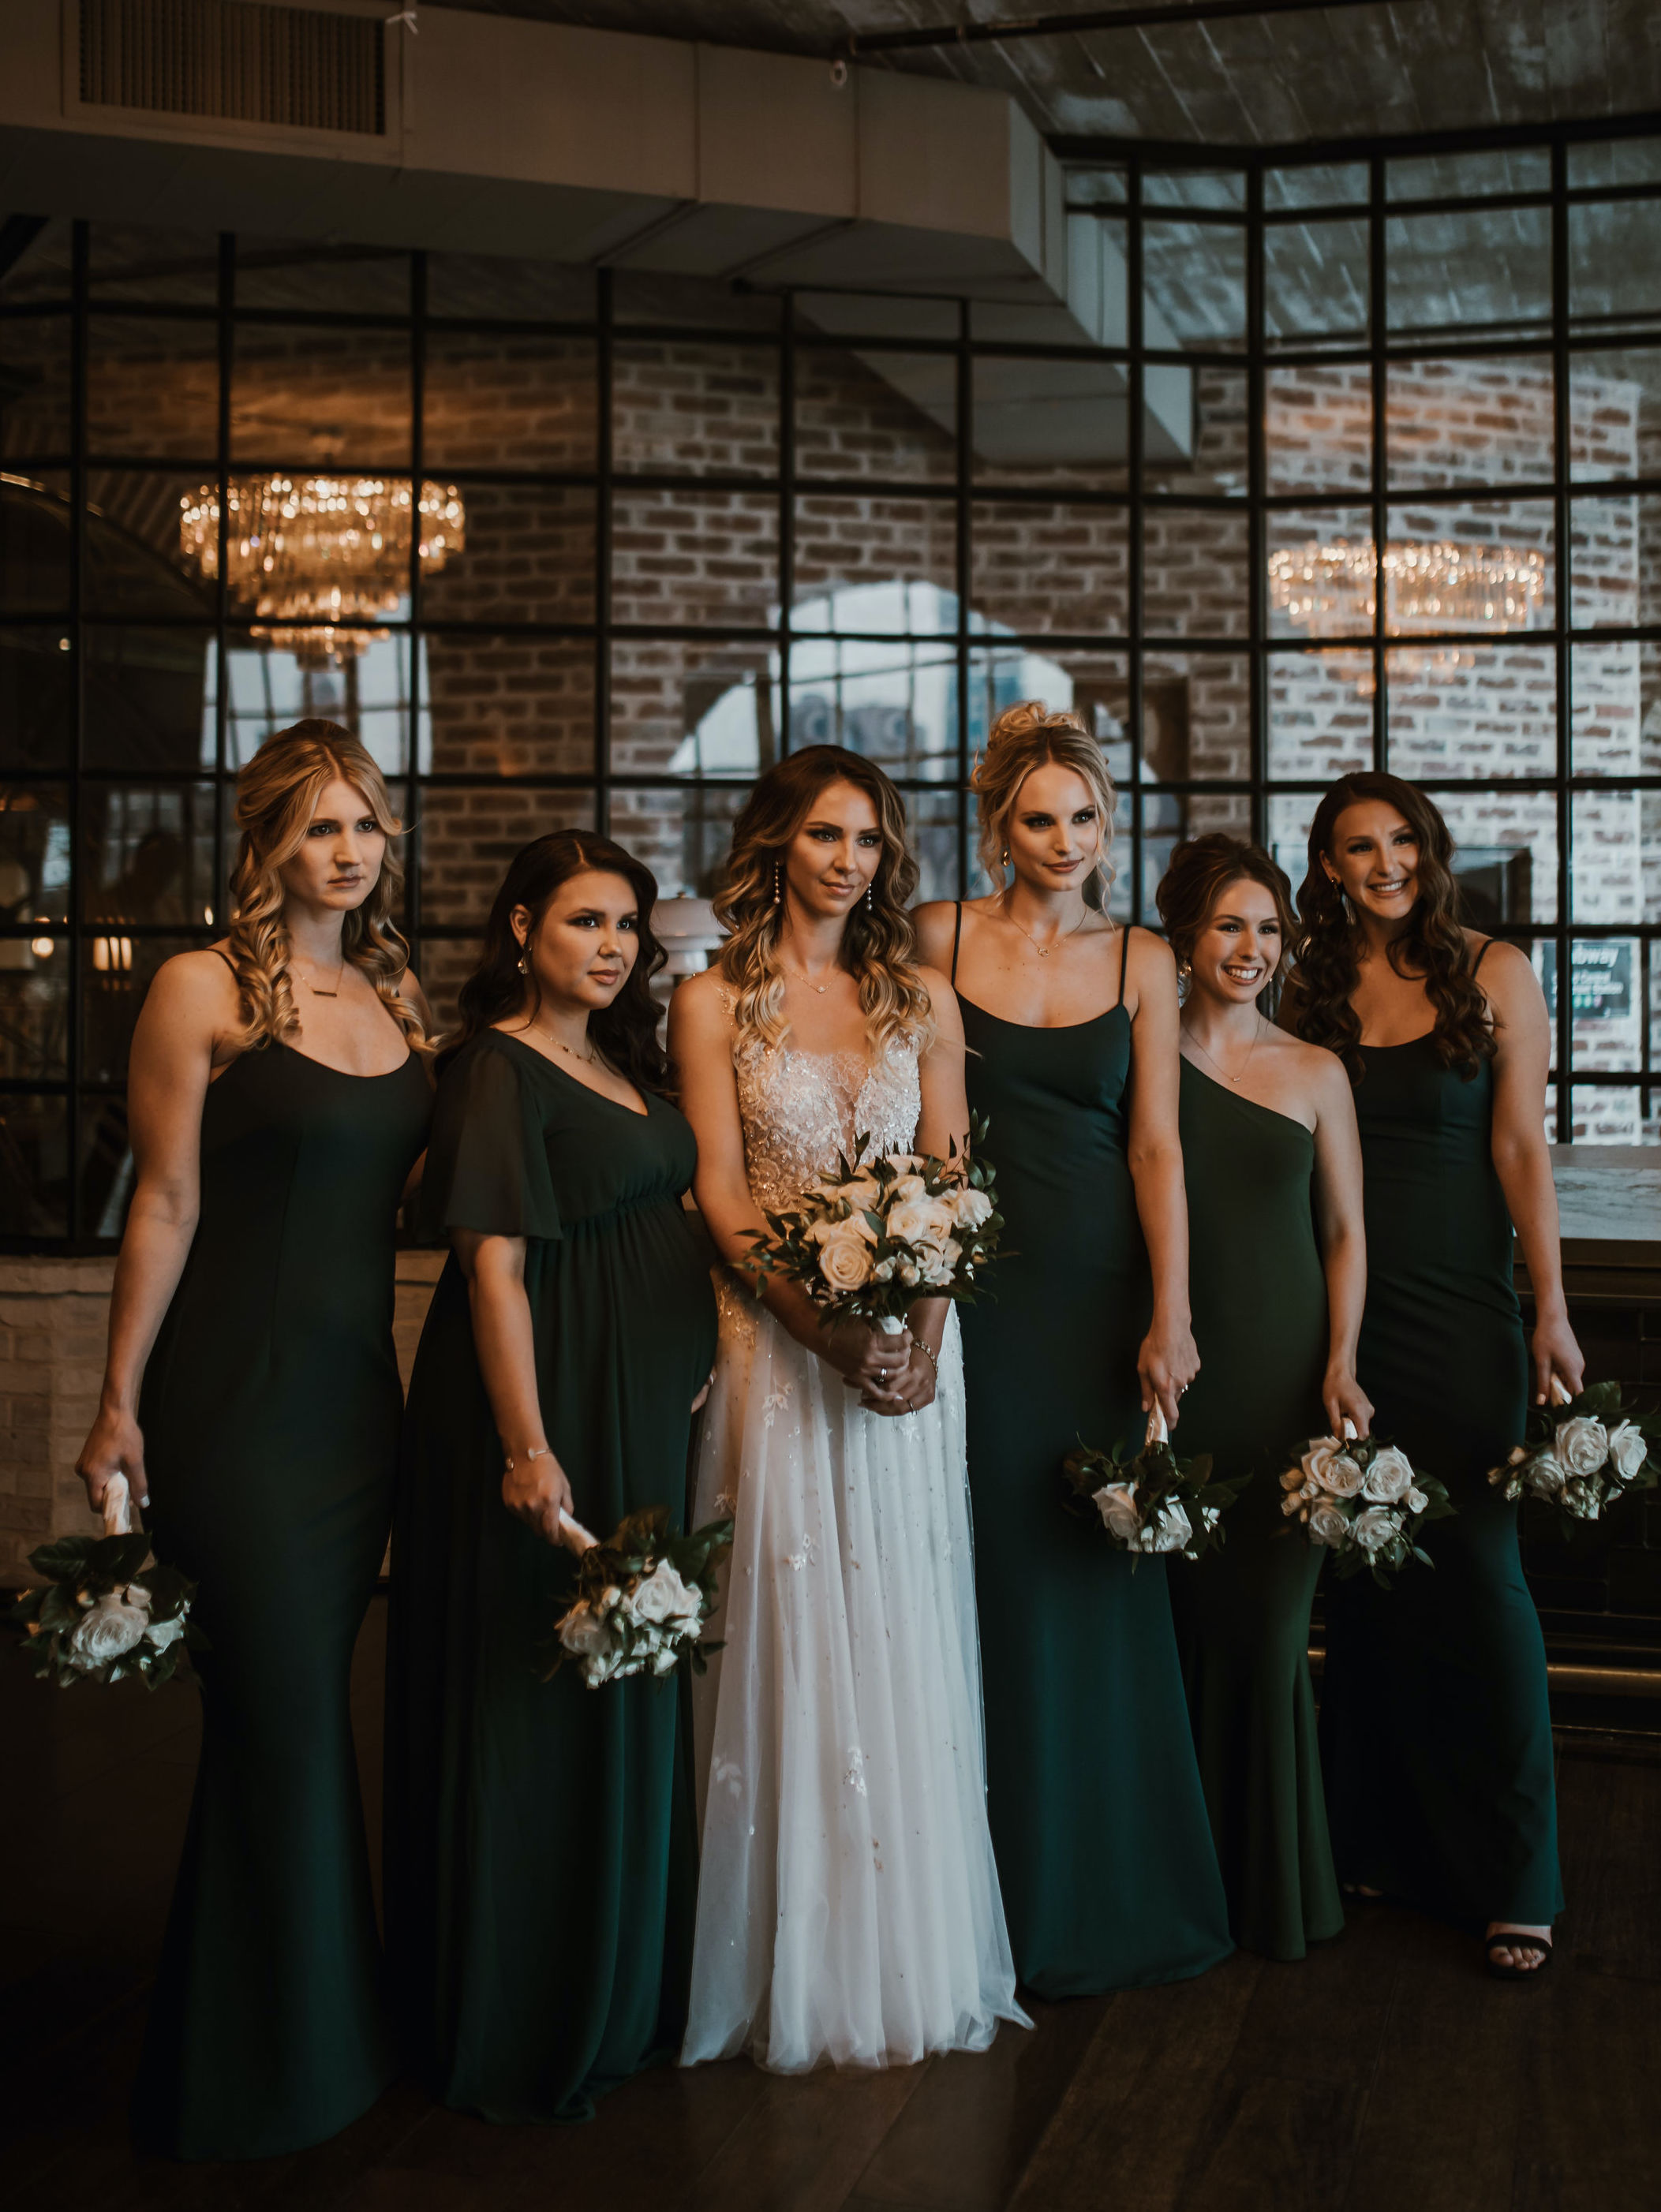 The bride poses with her bridesmaids who are all wearing emerald green dresses and white flower bouquets with greenery. They are standing in The Astorian, a Houston wedding venue.